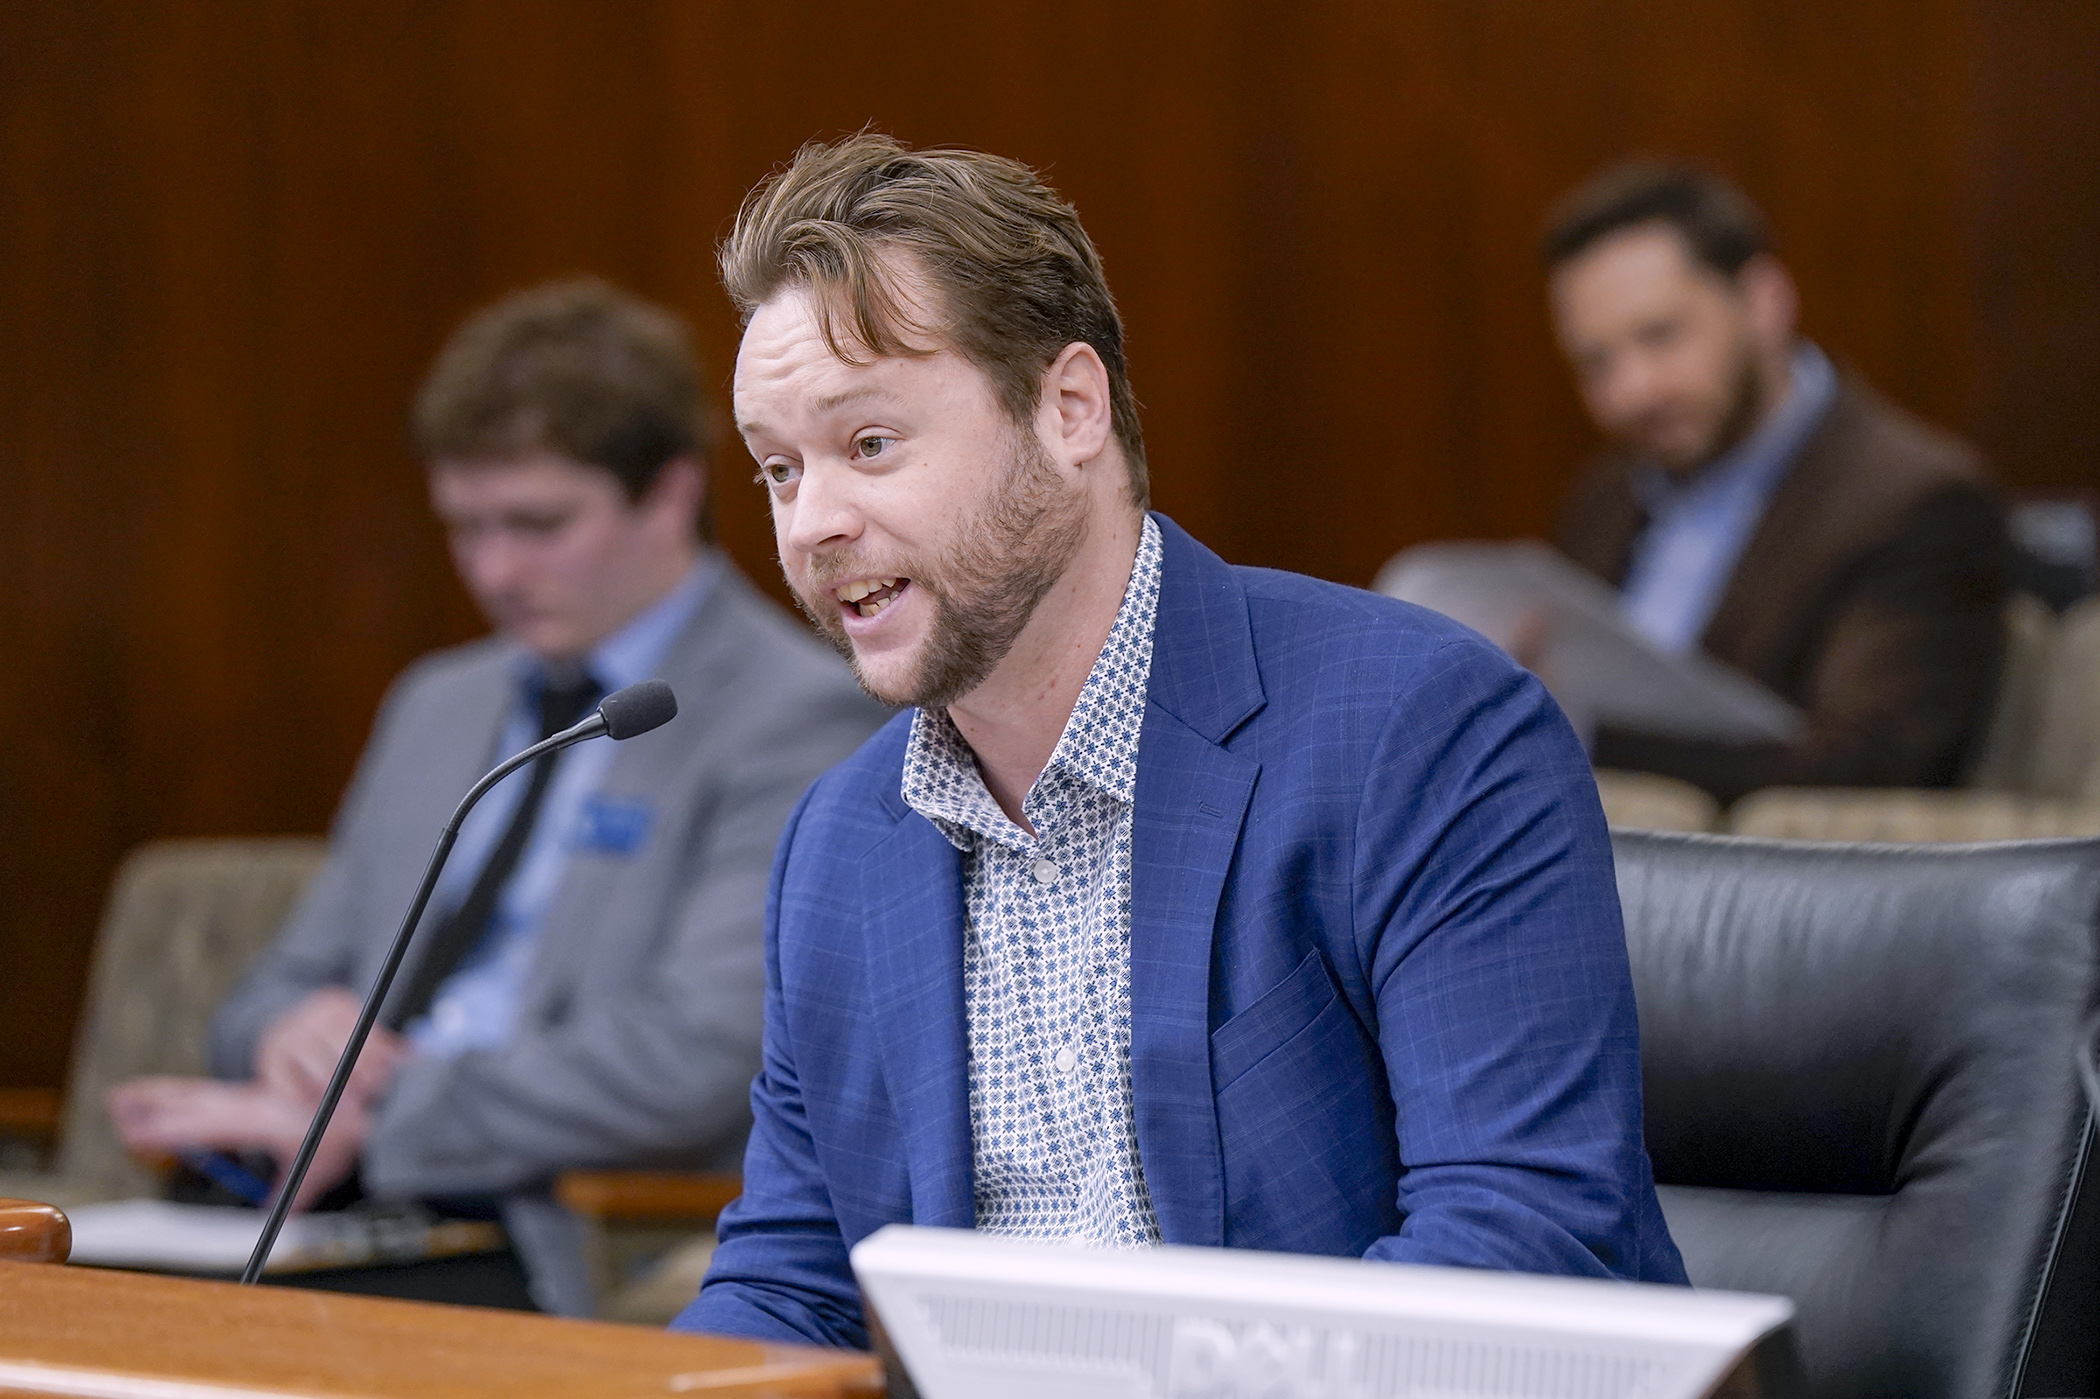 Robert Singleton, director of policy and public affairs for California and the Western U.S. at the Chamber of Progress, testifies Monday against HF4400, a bill to impose new prohibitions and requirements on social media platforms. (Photo by Michele Jokinen)